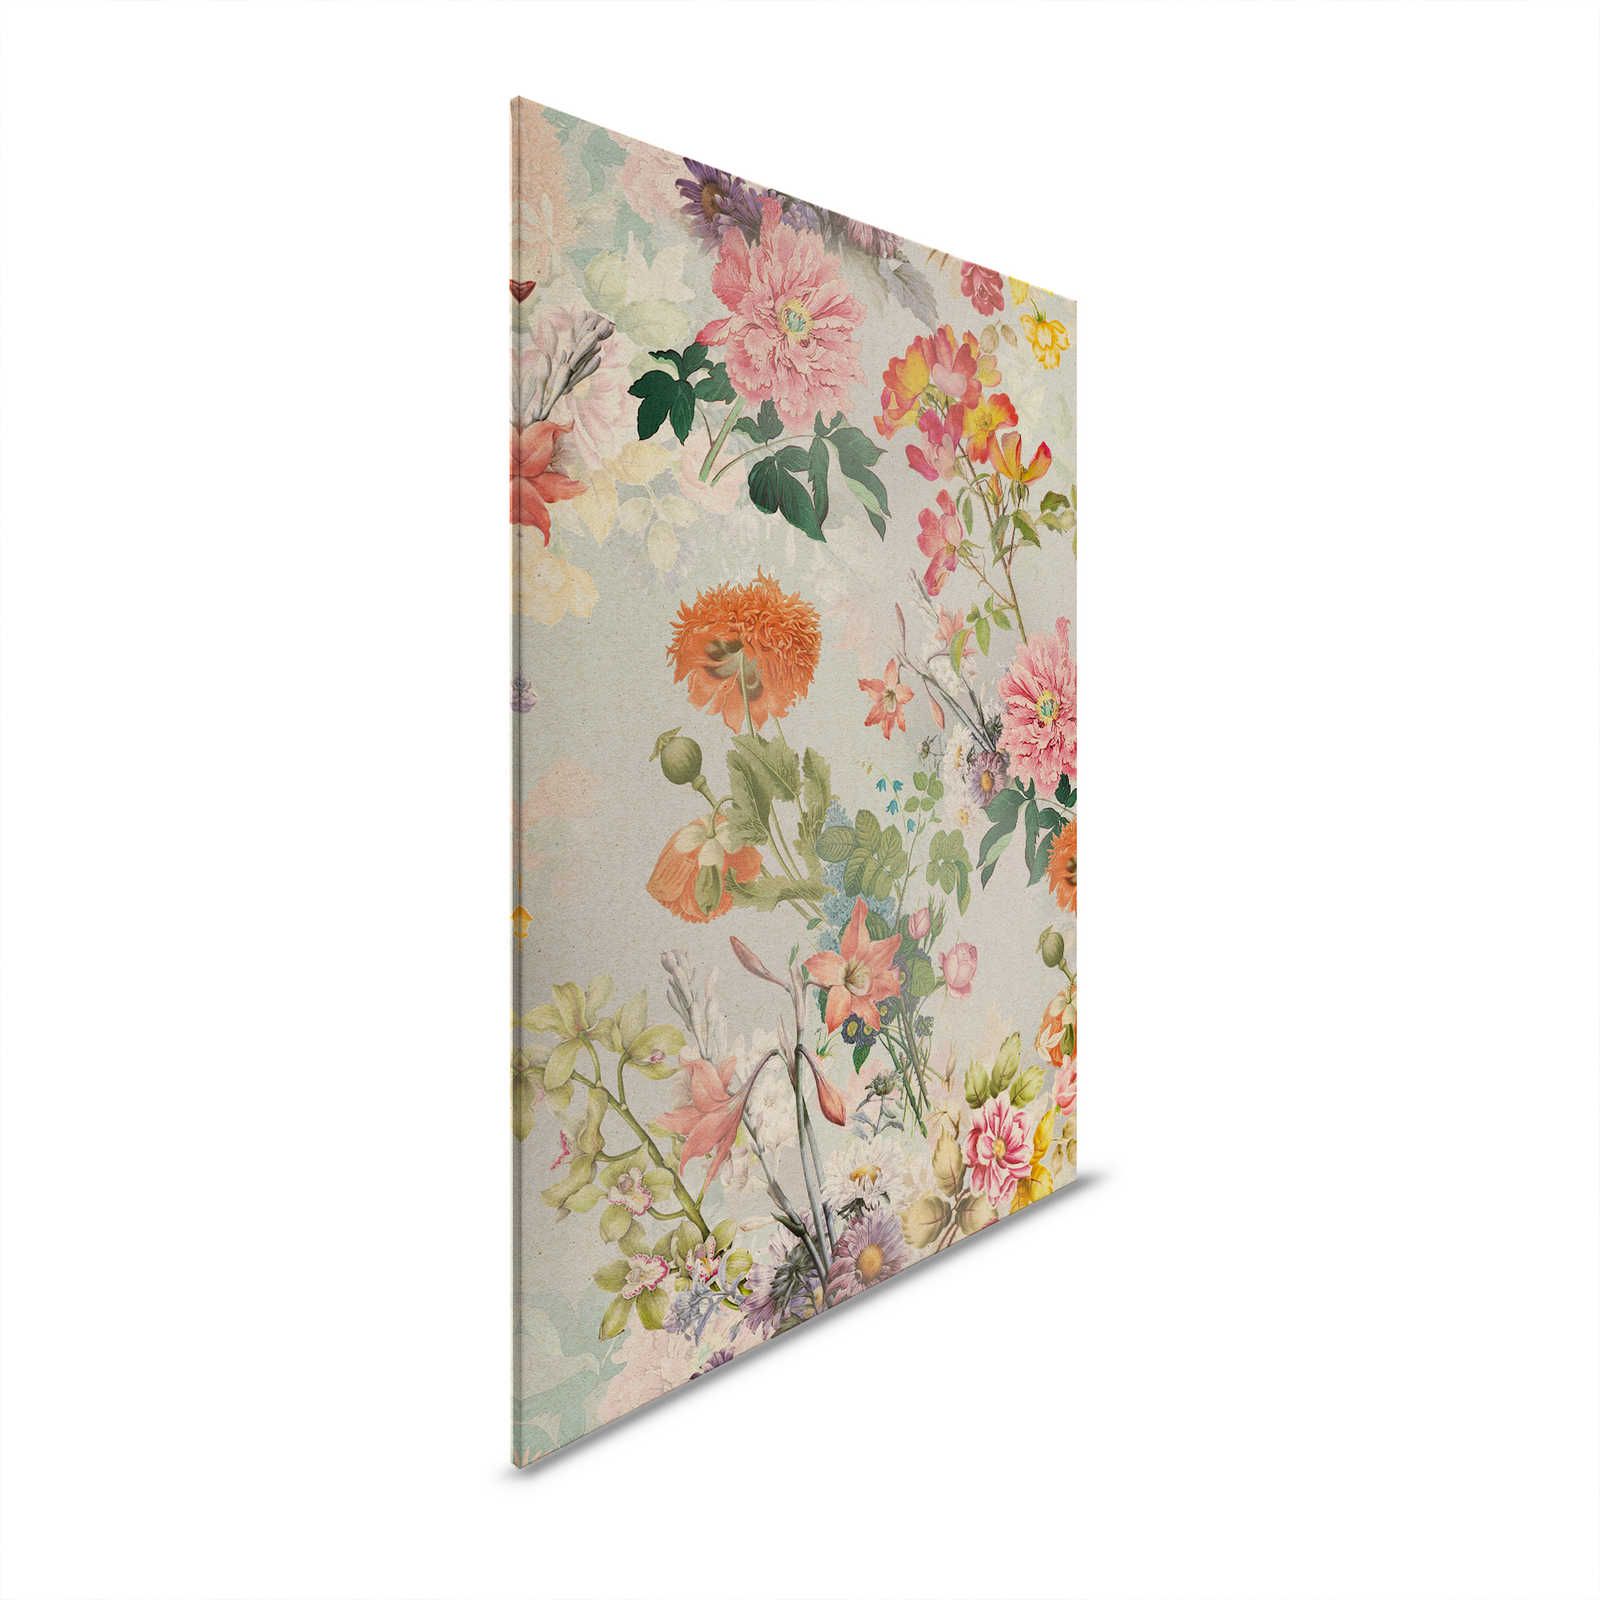         Amelies Home 1 - Vintage Flowers Romantic Country Style Canvas Picture - 0.90 m x 0.60 m
    